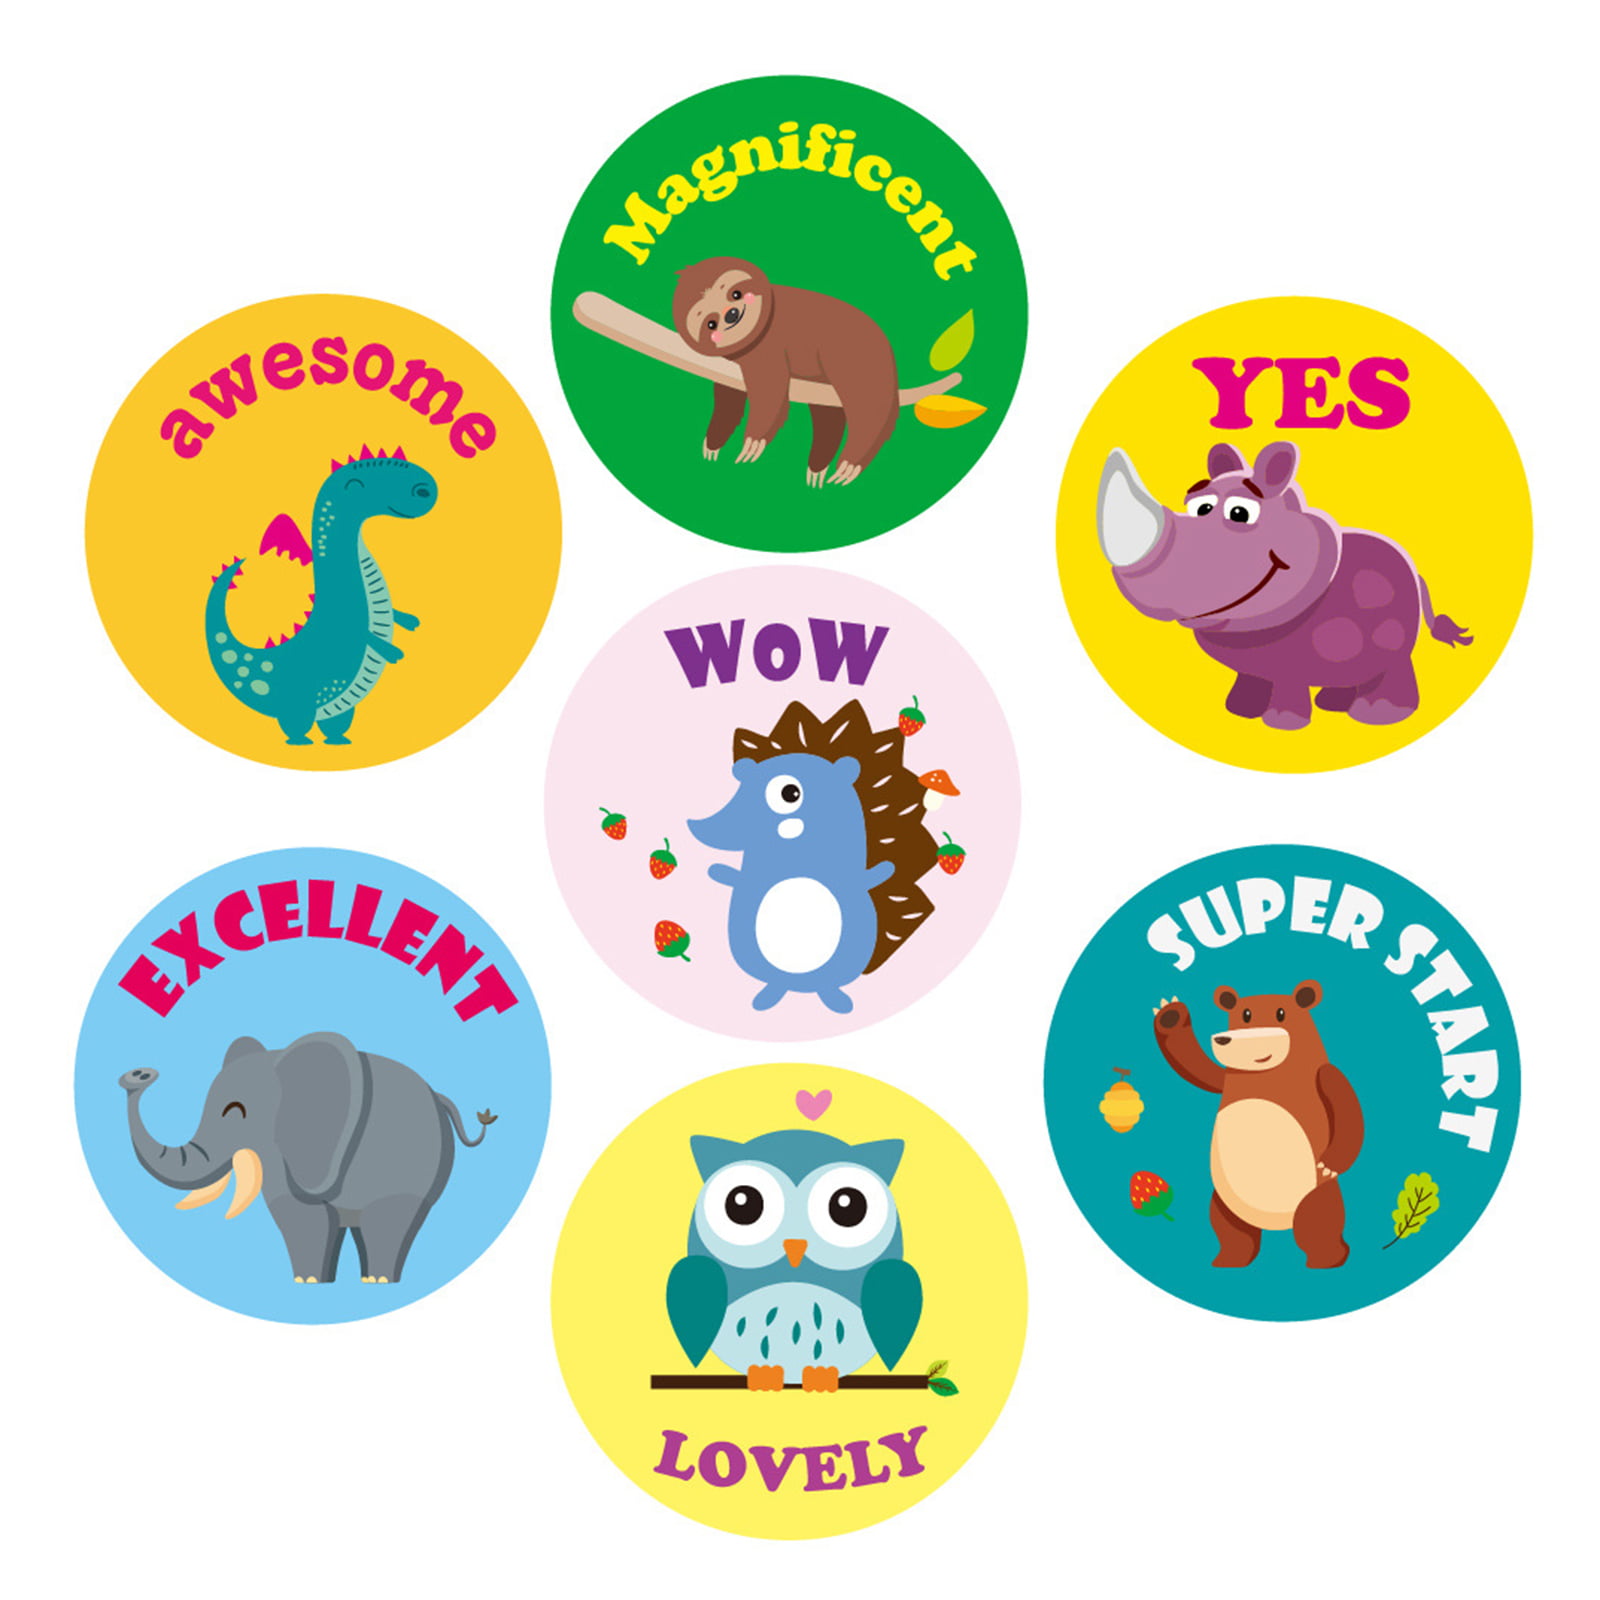 600 Incentive Stickers Adorable Round Animal Encouraging Stickers Teacher Reward Motivational Sticker in 16 Designs with Perforated Line Each Measures 1.5 in Diameter